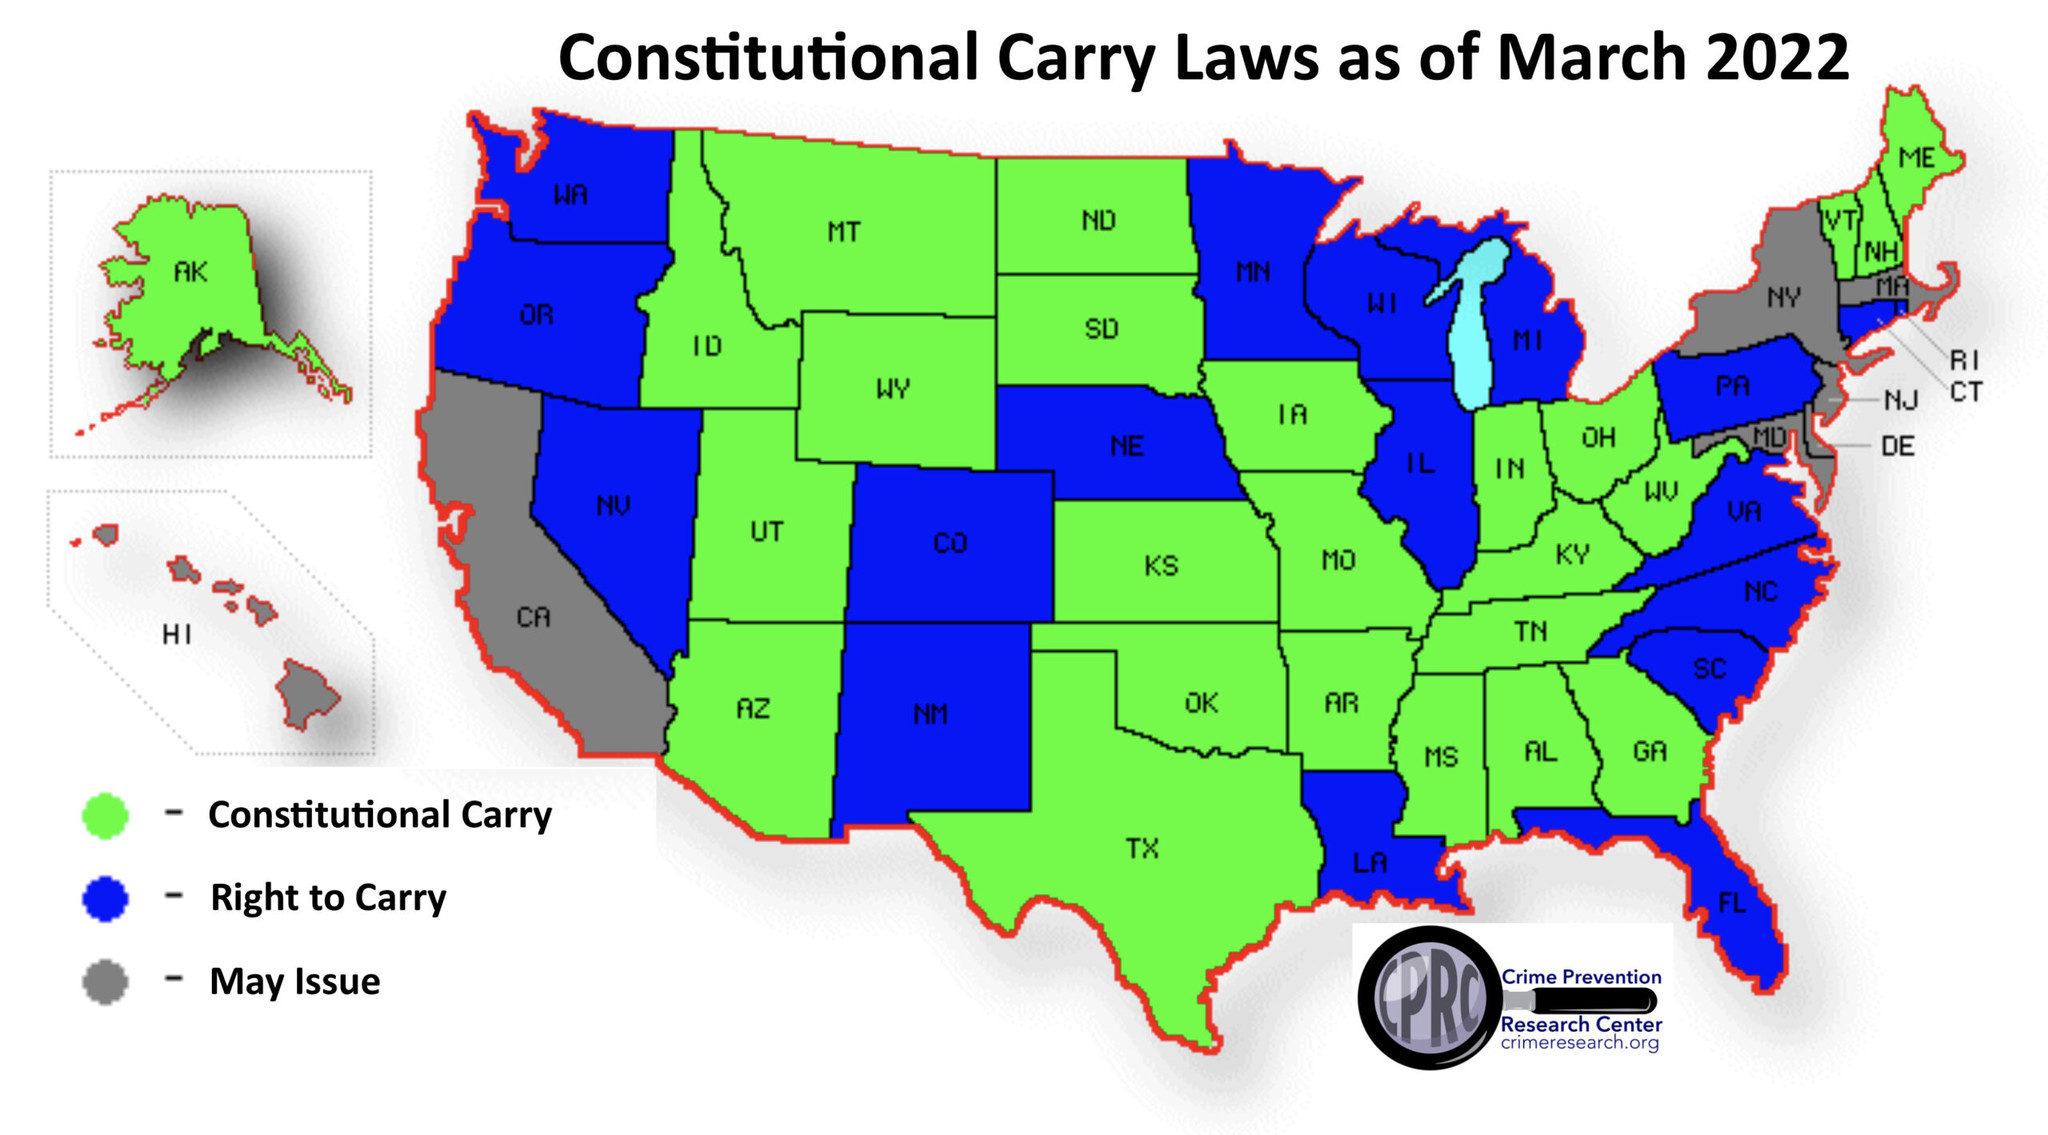 Constitutional Carry Laws as of March 2022